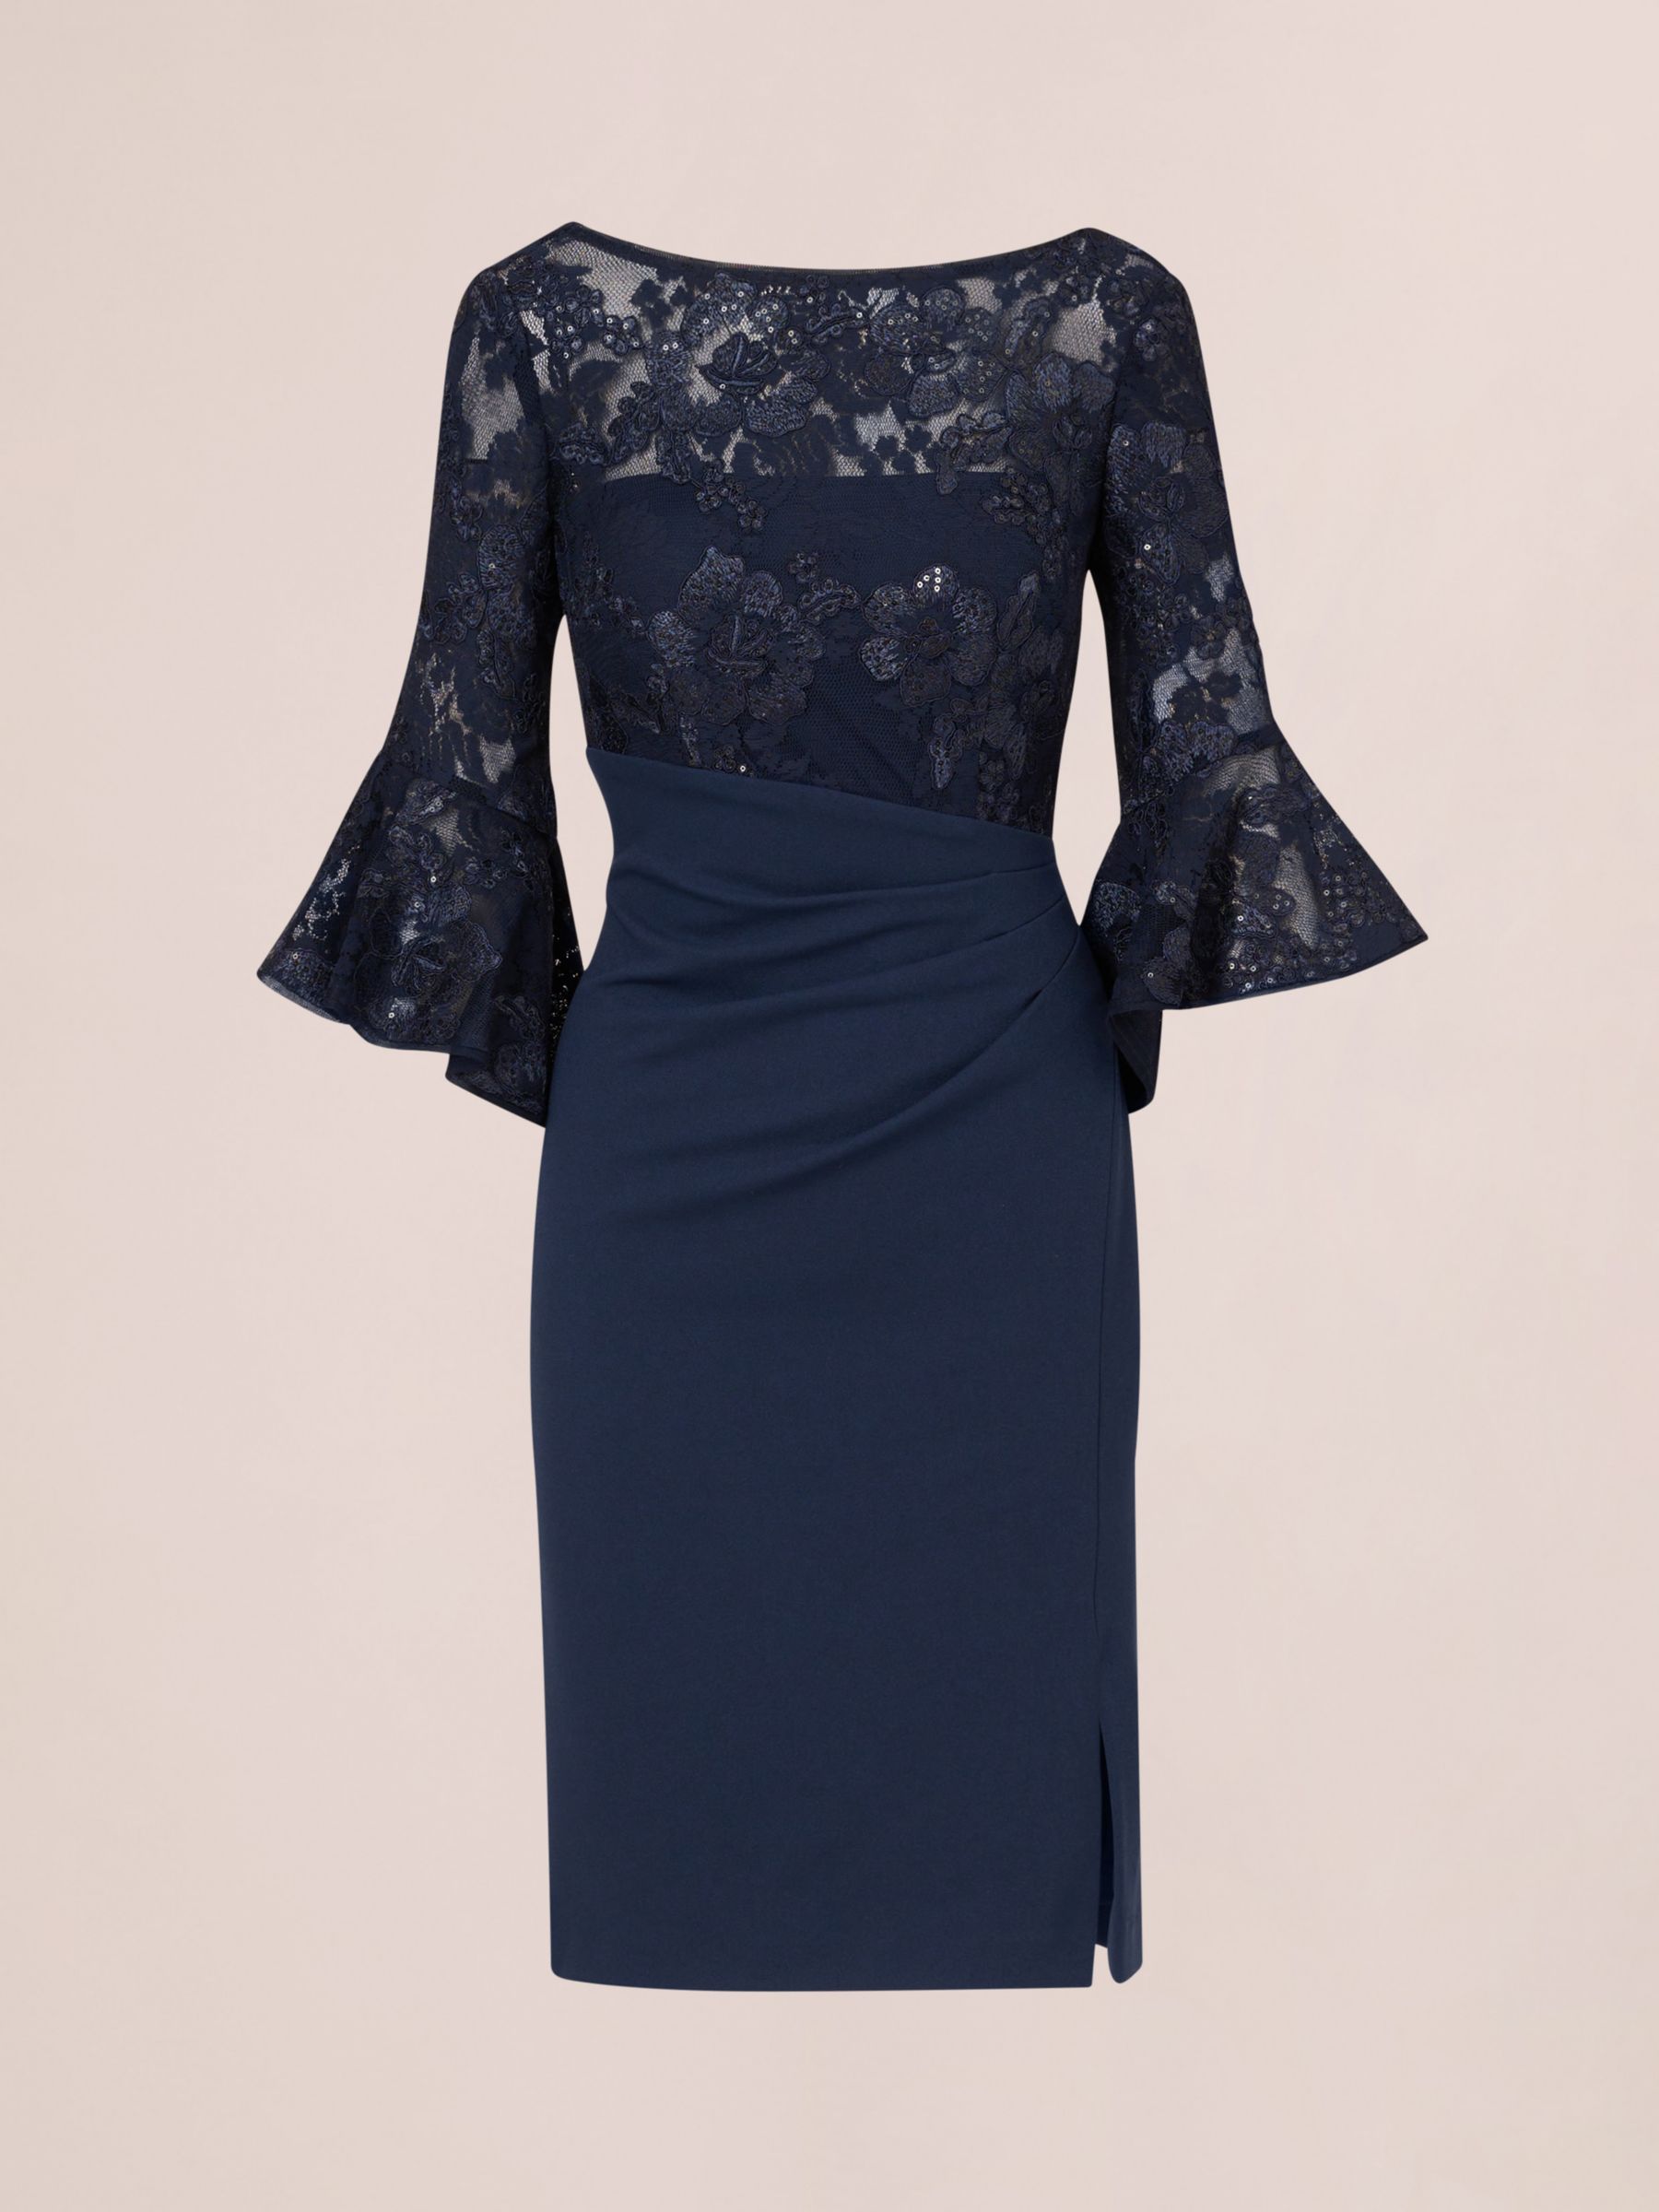 Buy Adrianna Papell Floral Lace Combo Sheath Dress, Navy Online at johnlewis.com